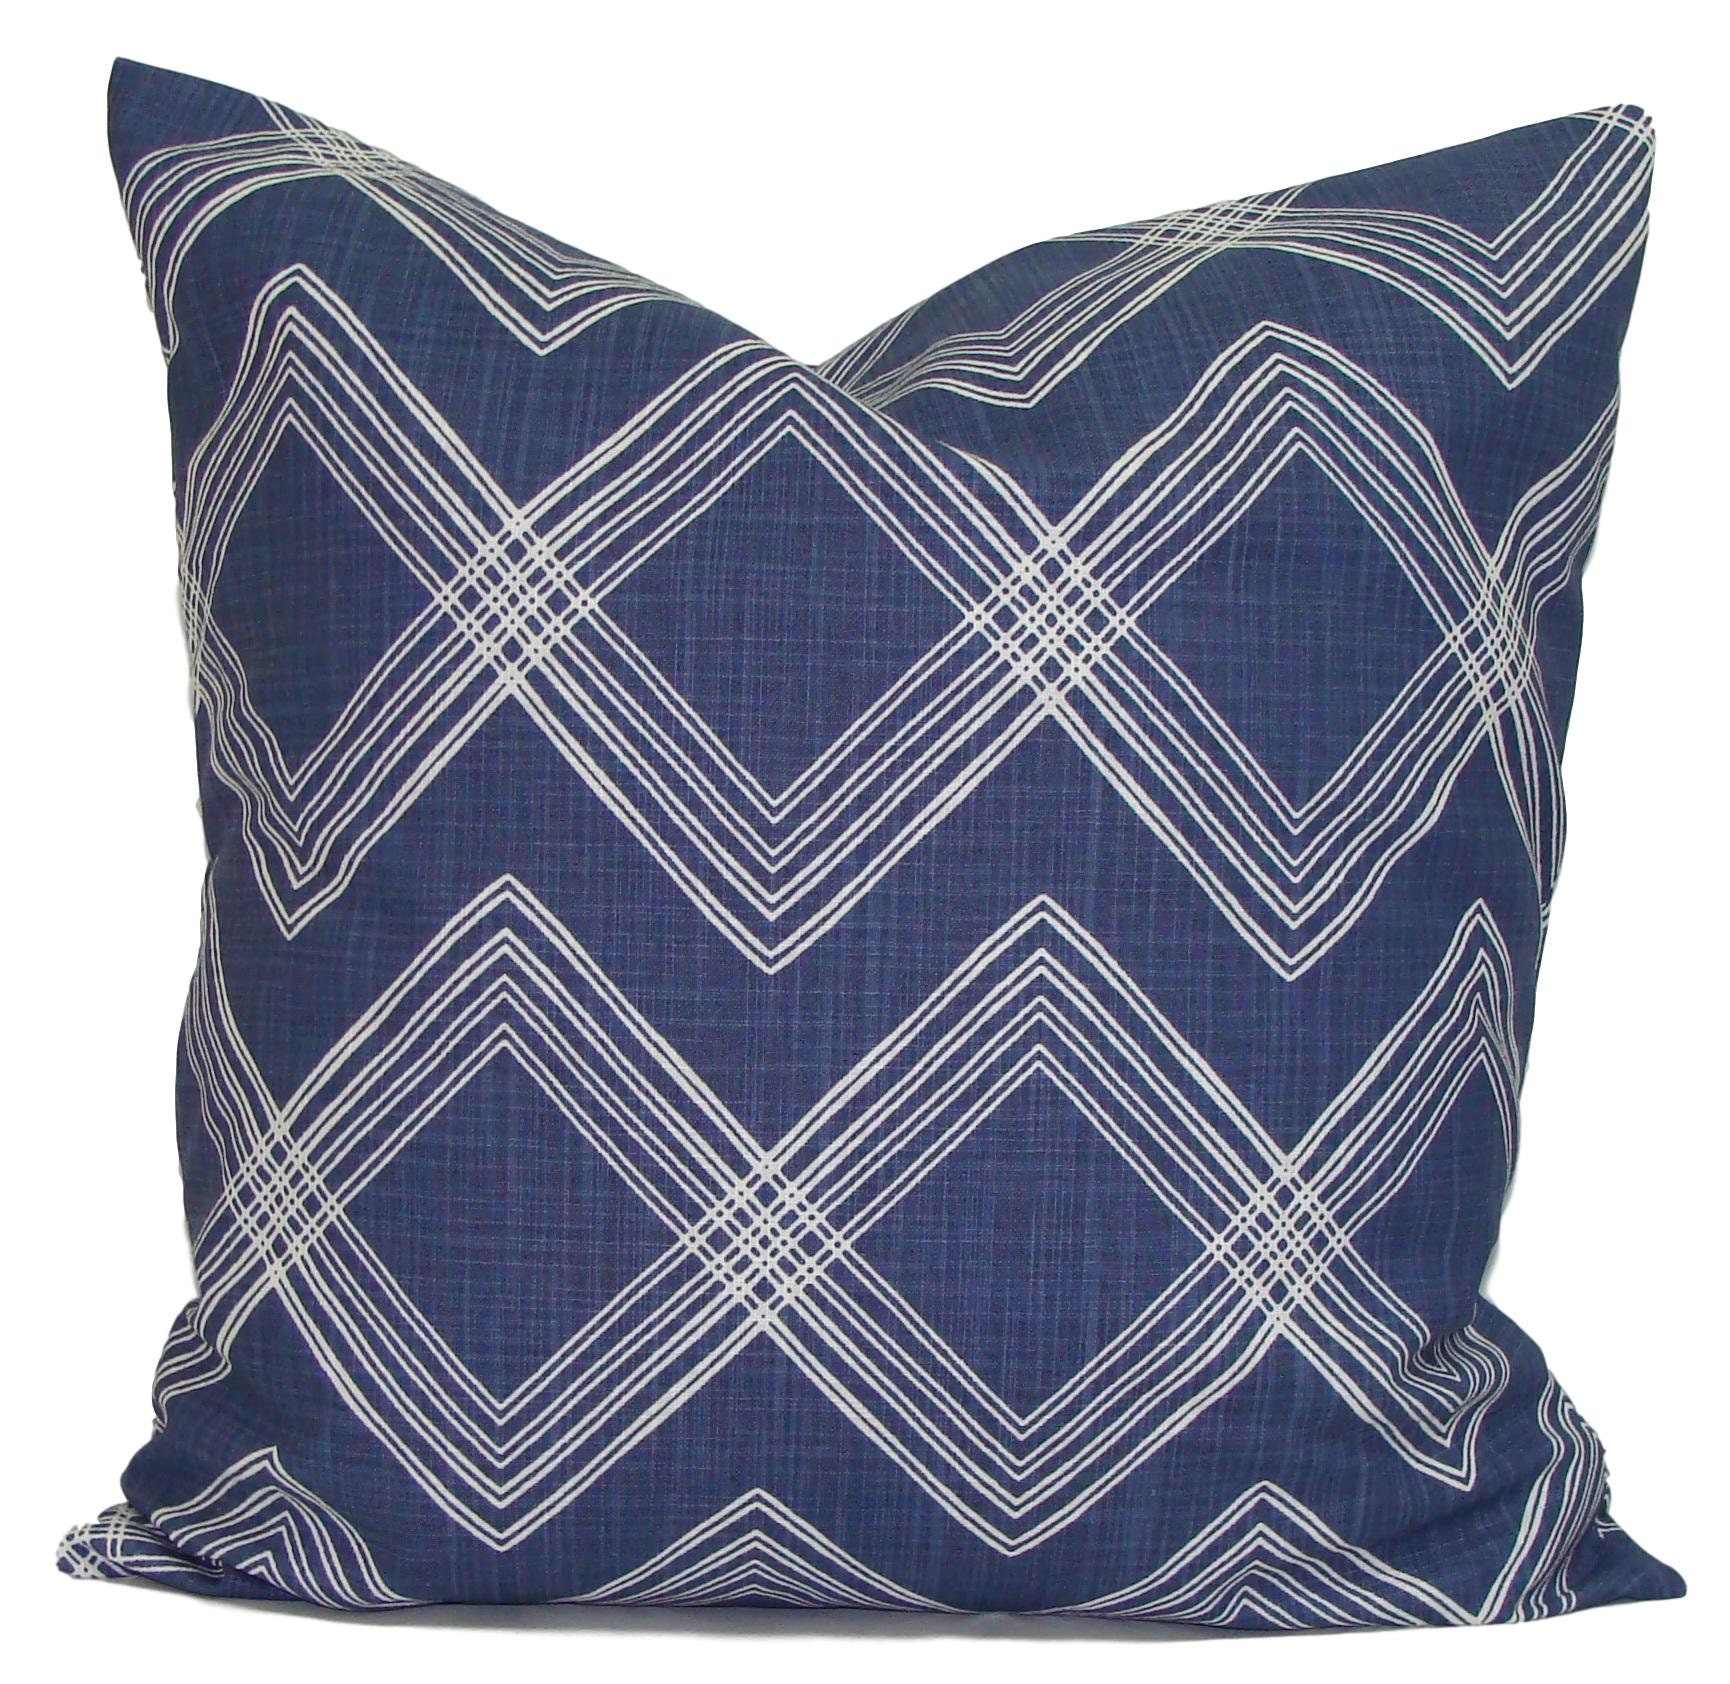 Solid Navy Pillow COVERS for 20x20 Pillow Inserts, Solid Blue Pillow Cover,  Solid Navy Throw Pillows for 20x20 Inserts 